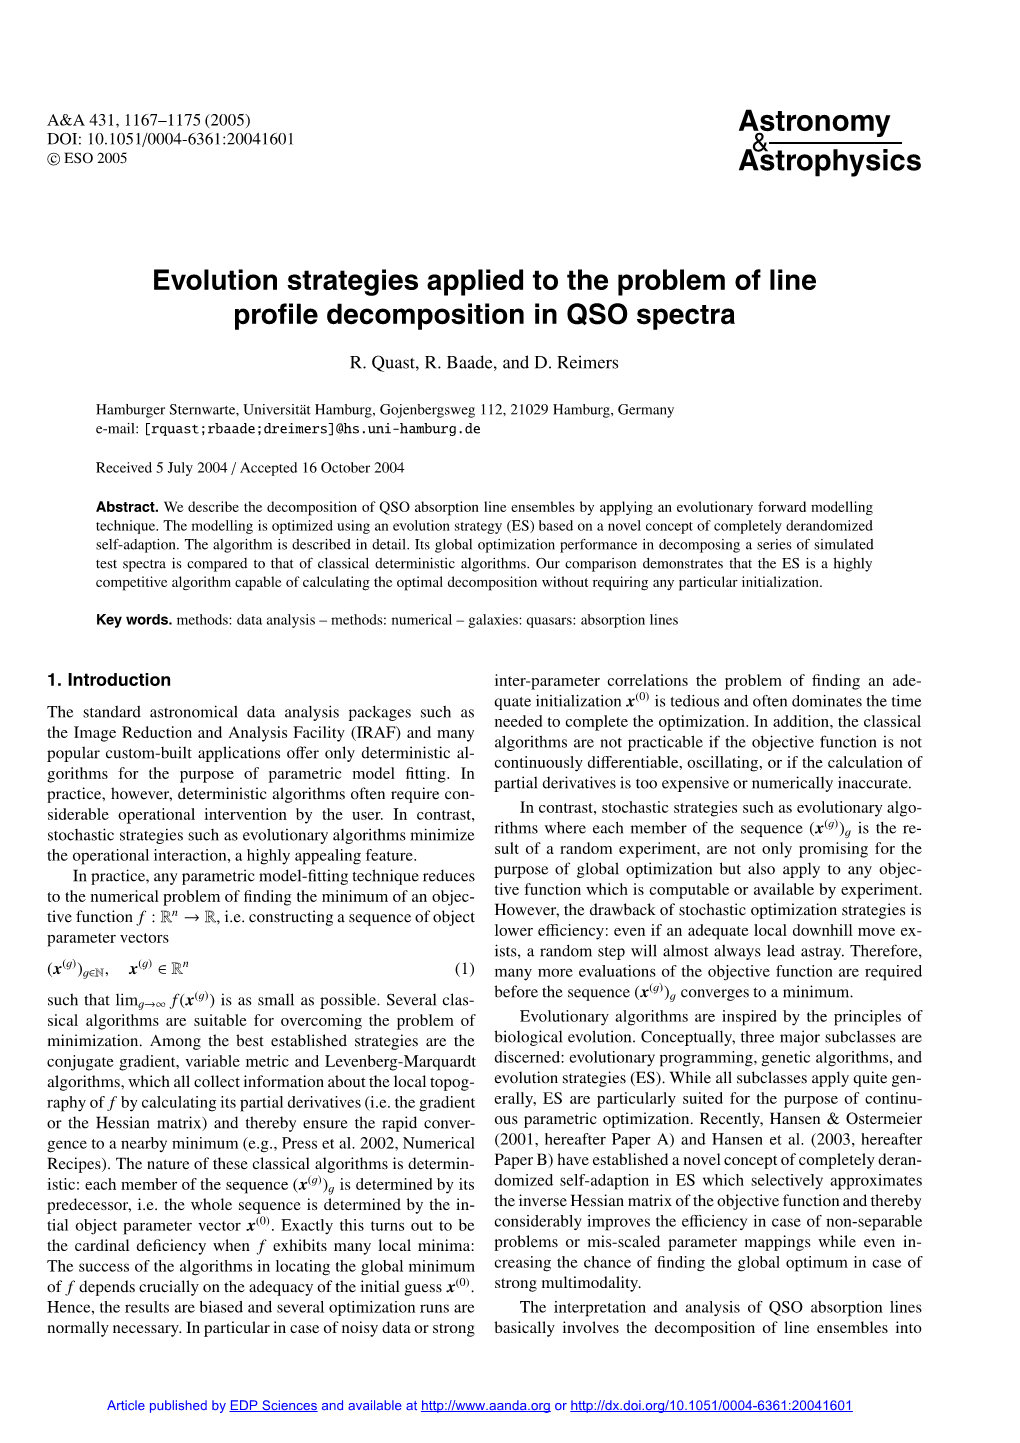 Evolution Strategies Applied to the Problem of Line Profile